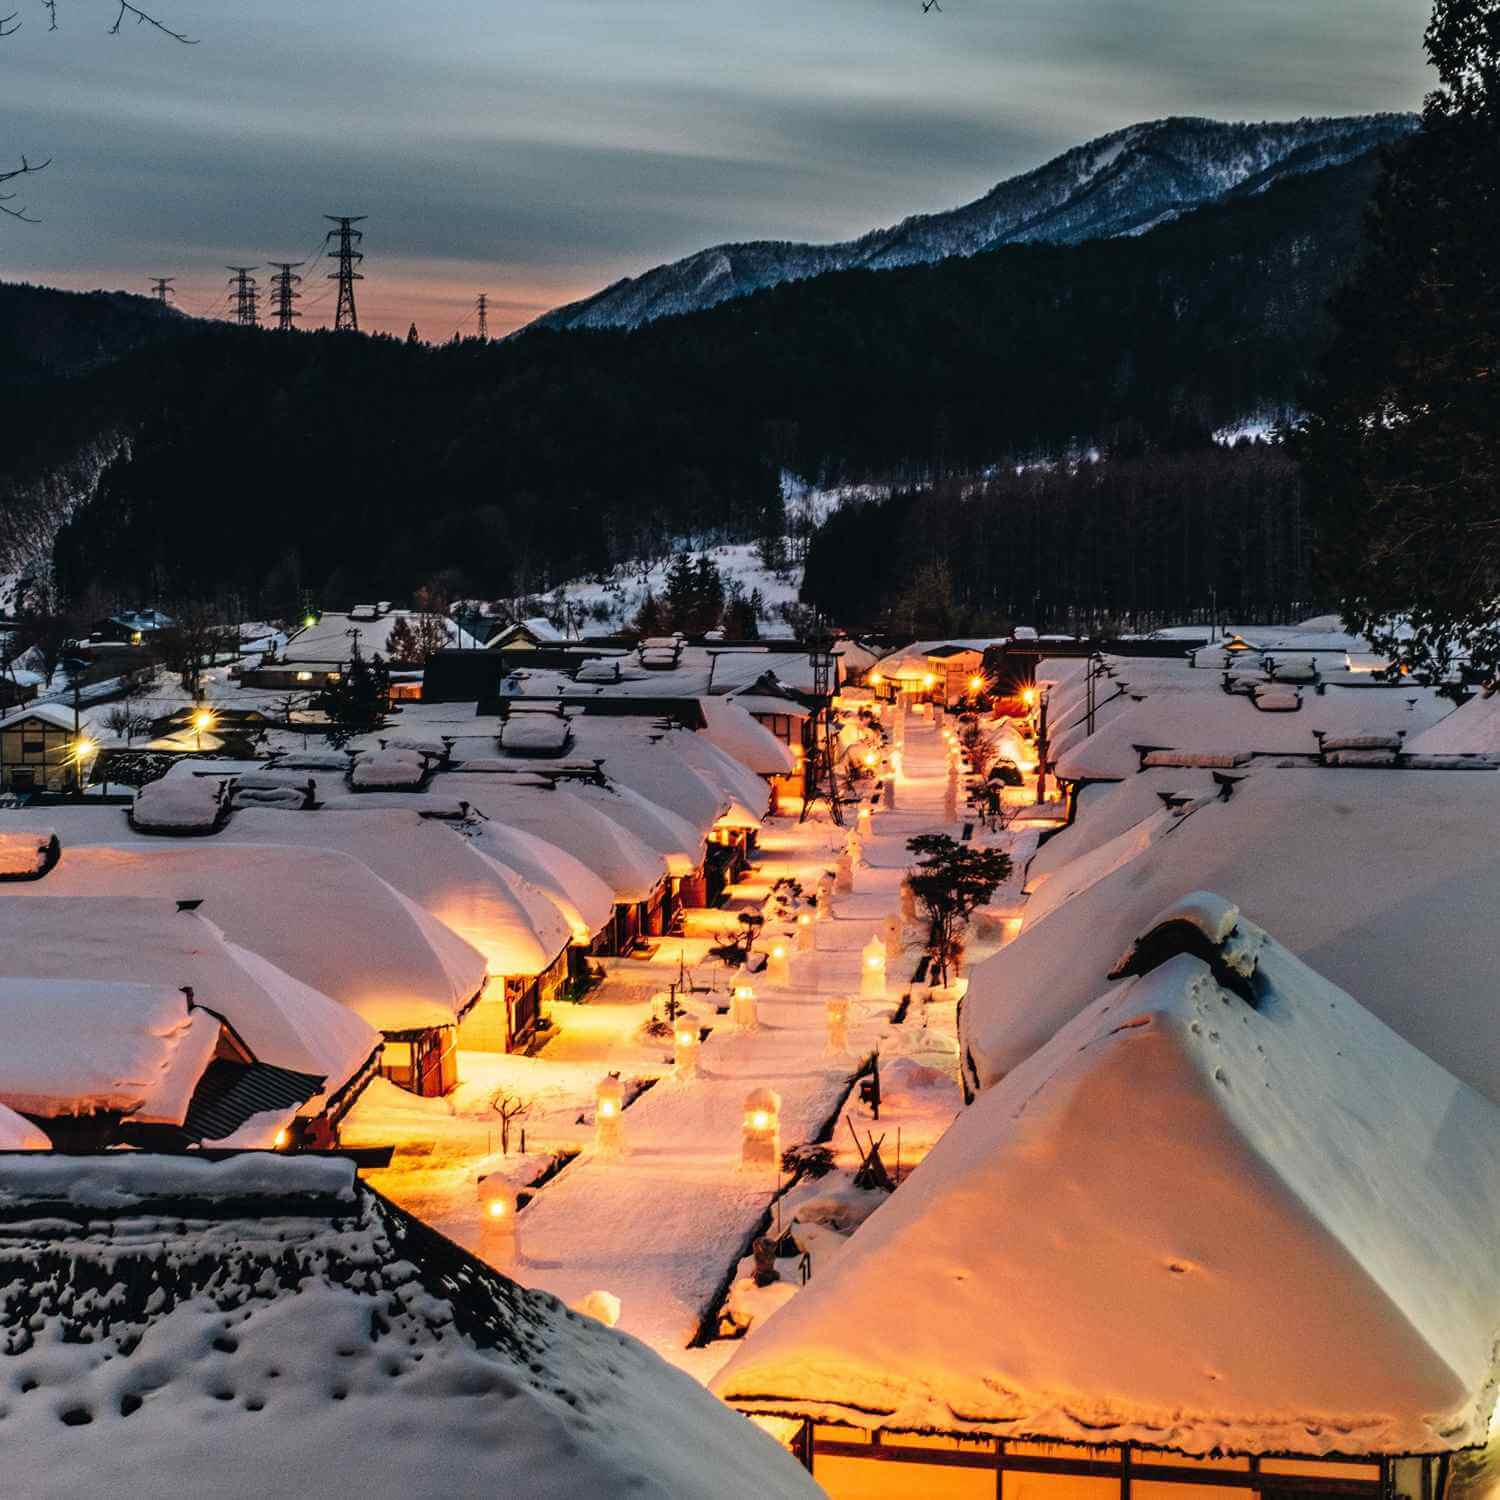 Photos of snow-covered villages10 Ouchi-juku